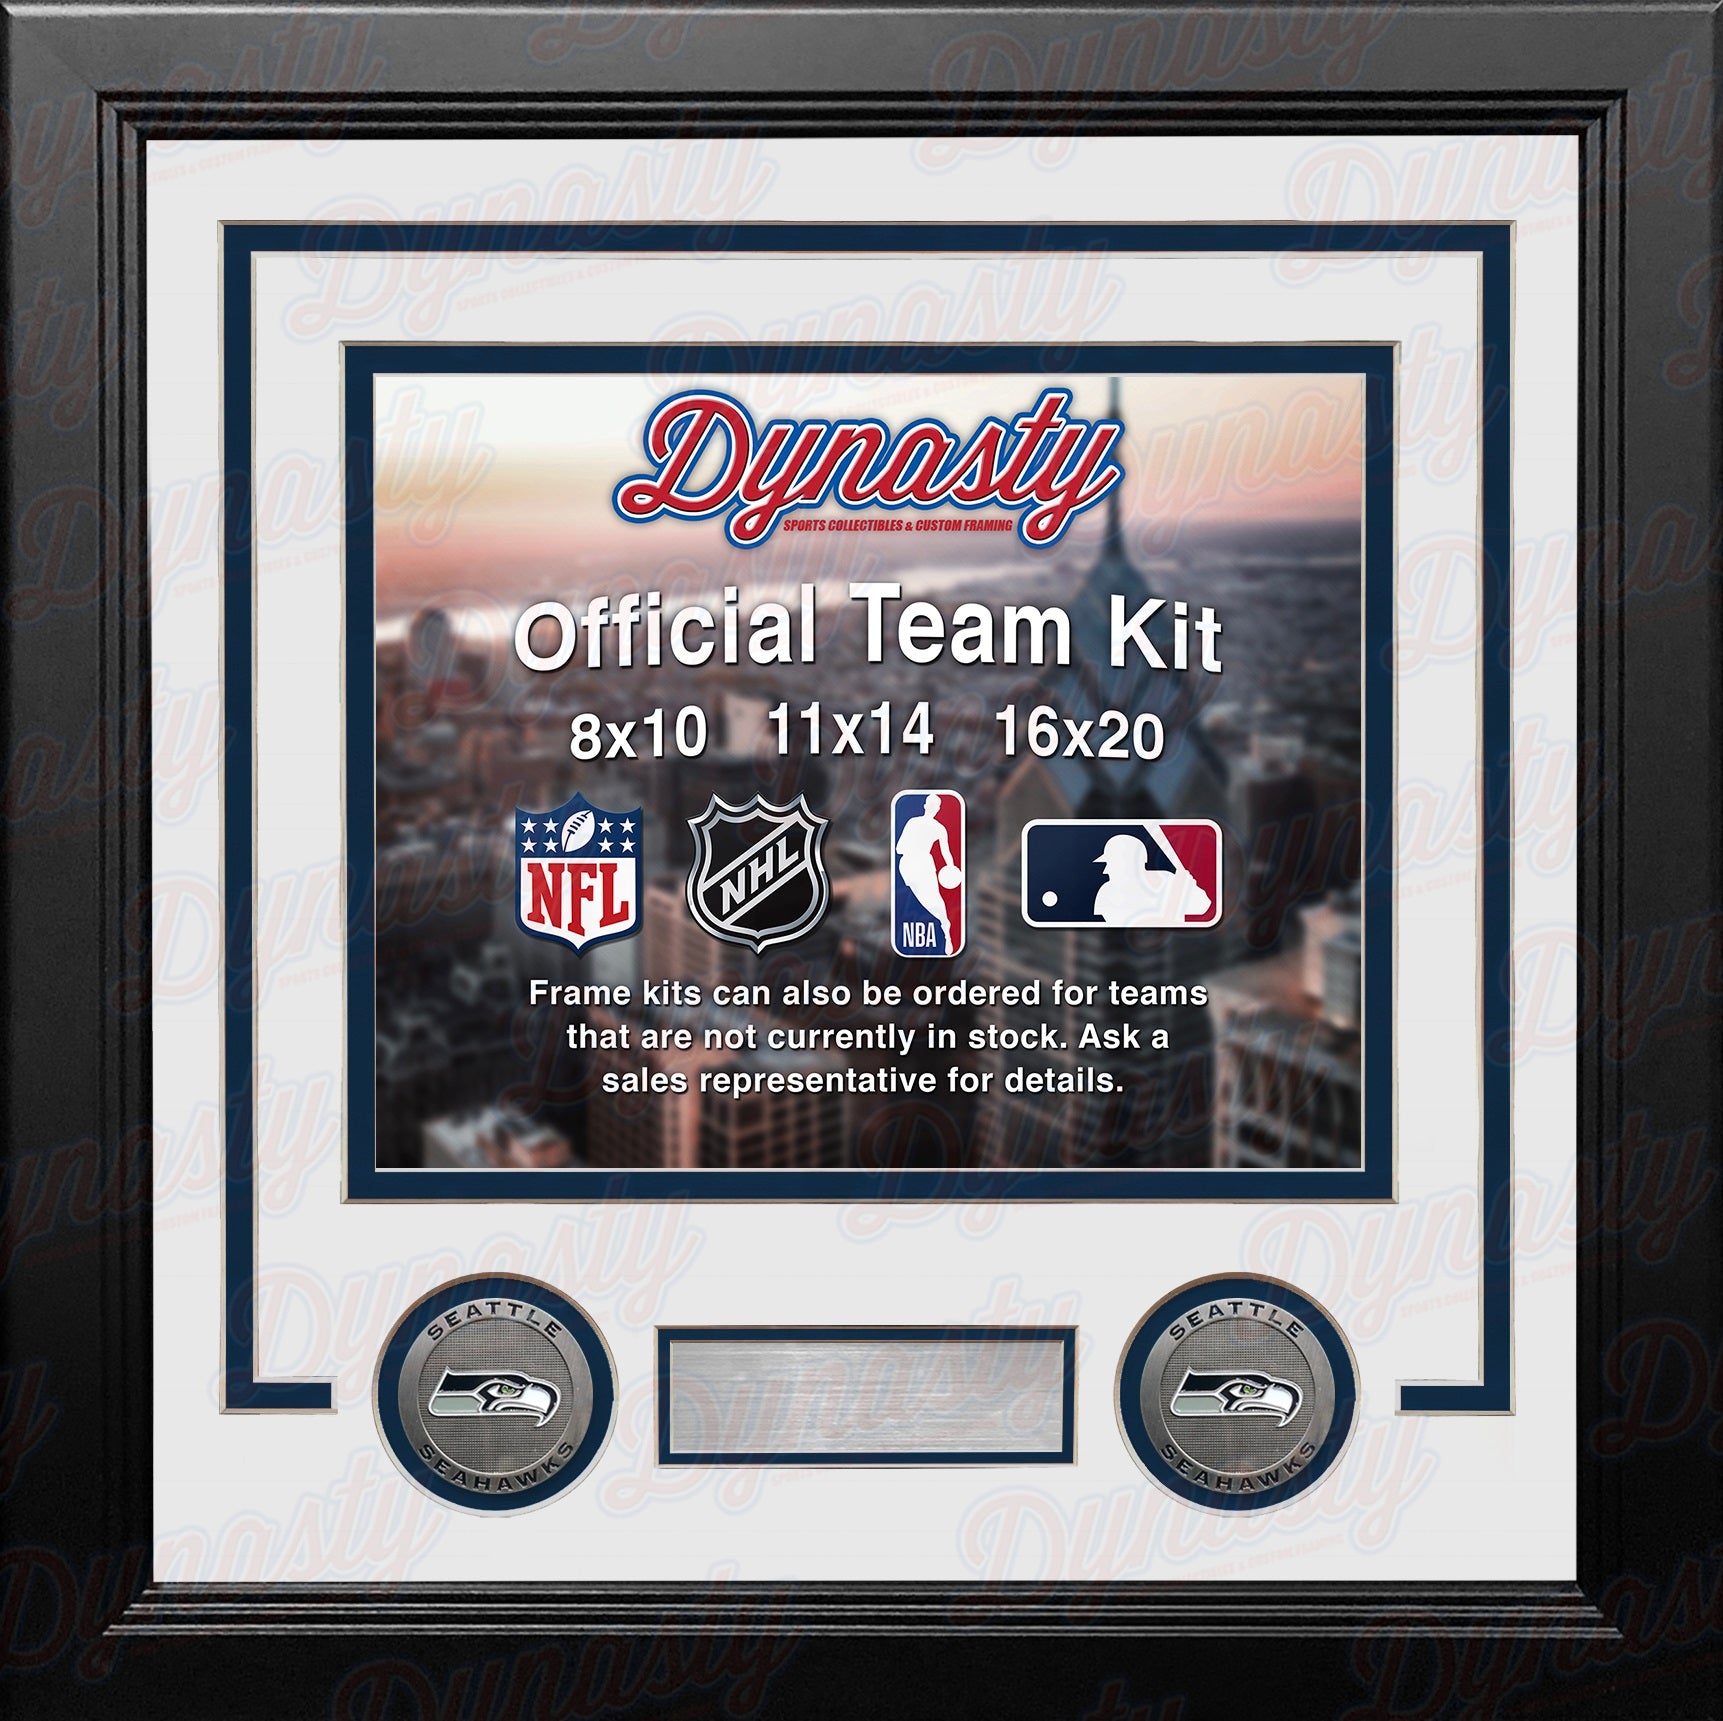 Seattle Seahawks Custom NFL Football 16x20 Picture Frame Kit (Multiple Colors) - Dynasty Sports & Framing 